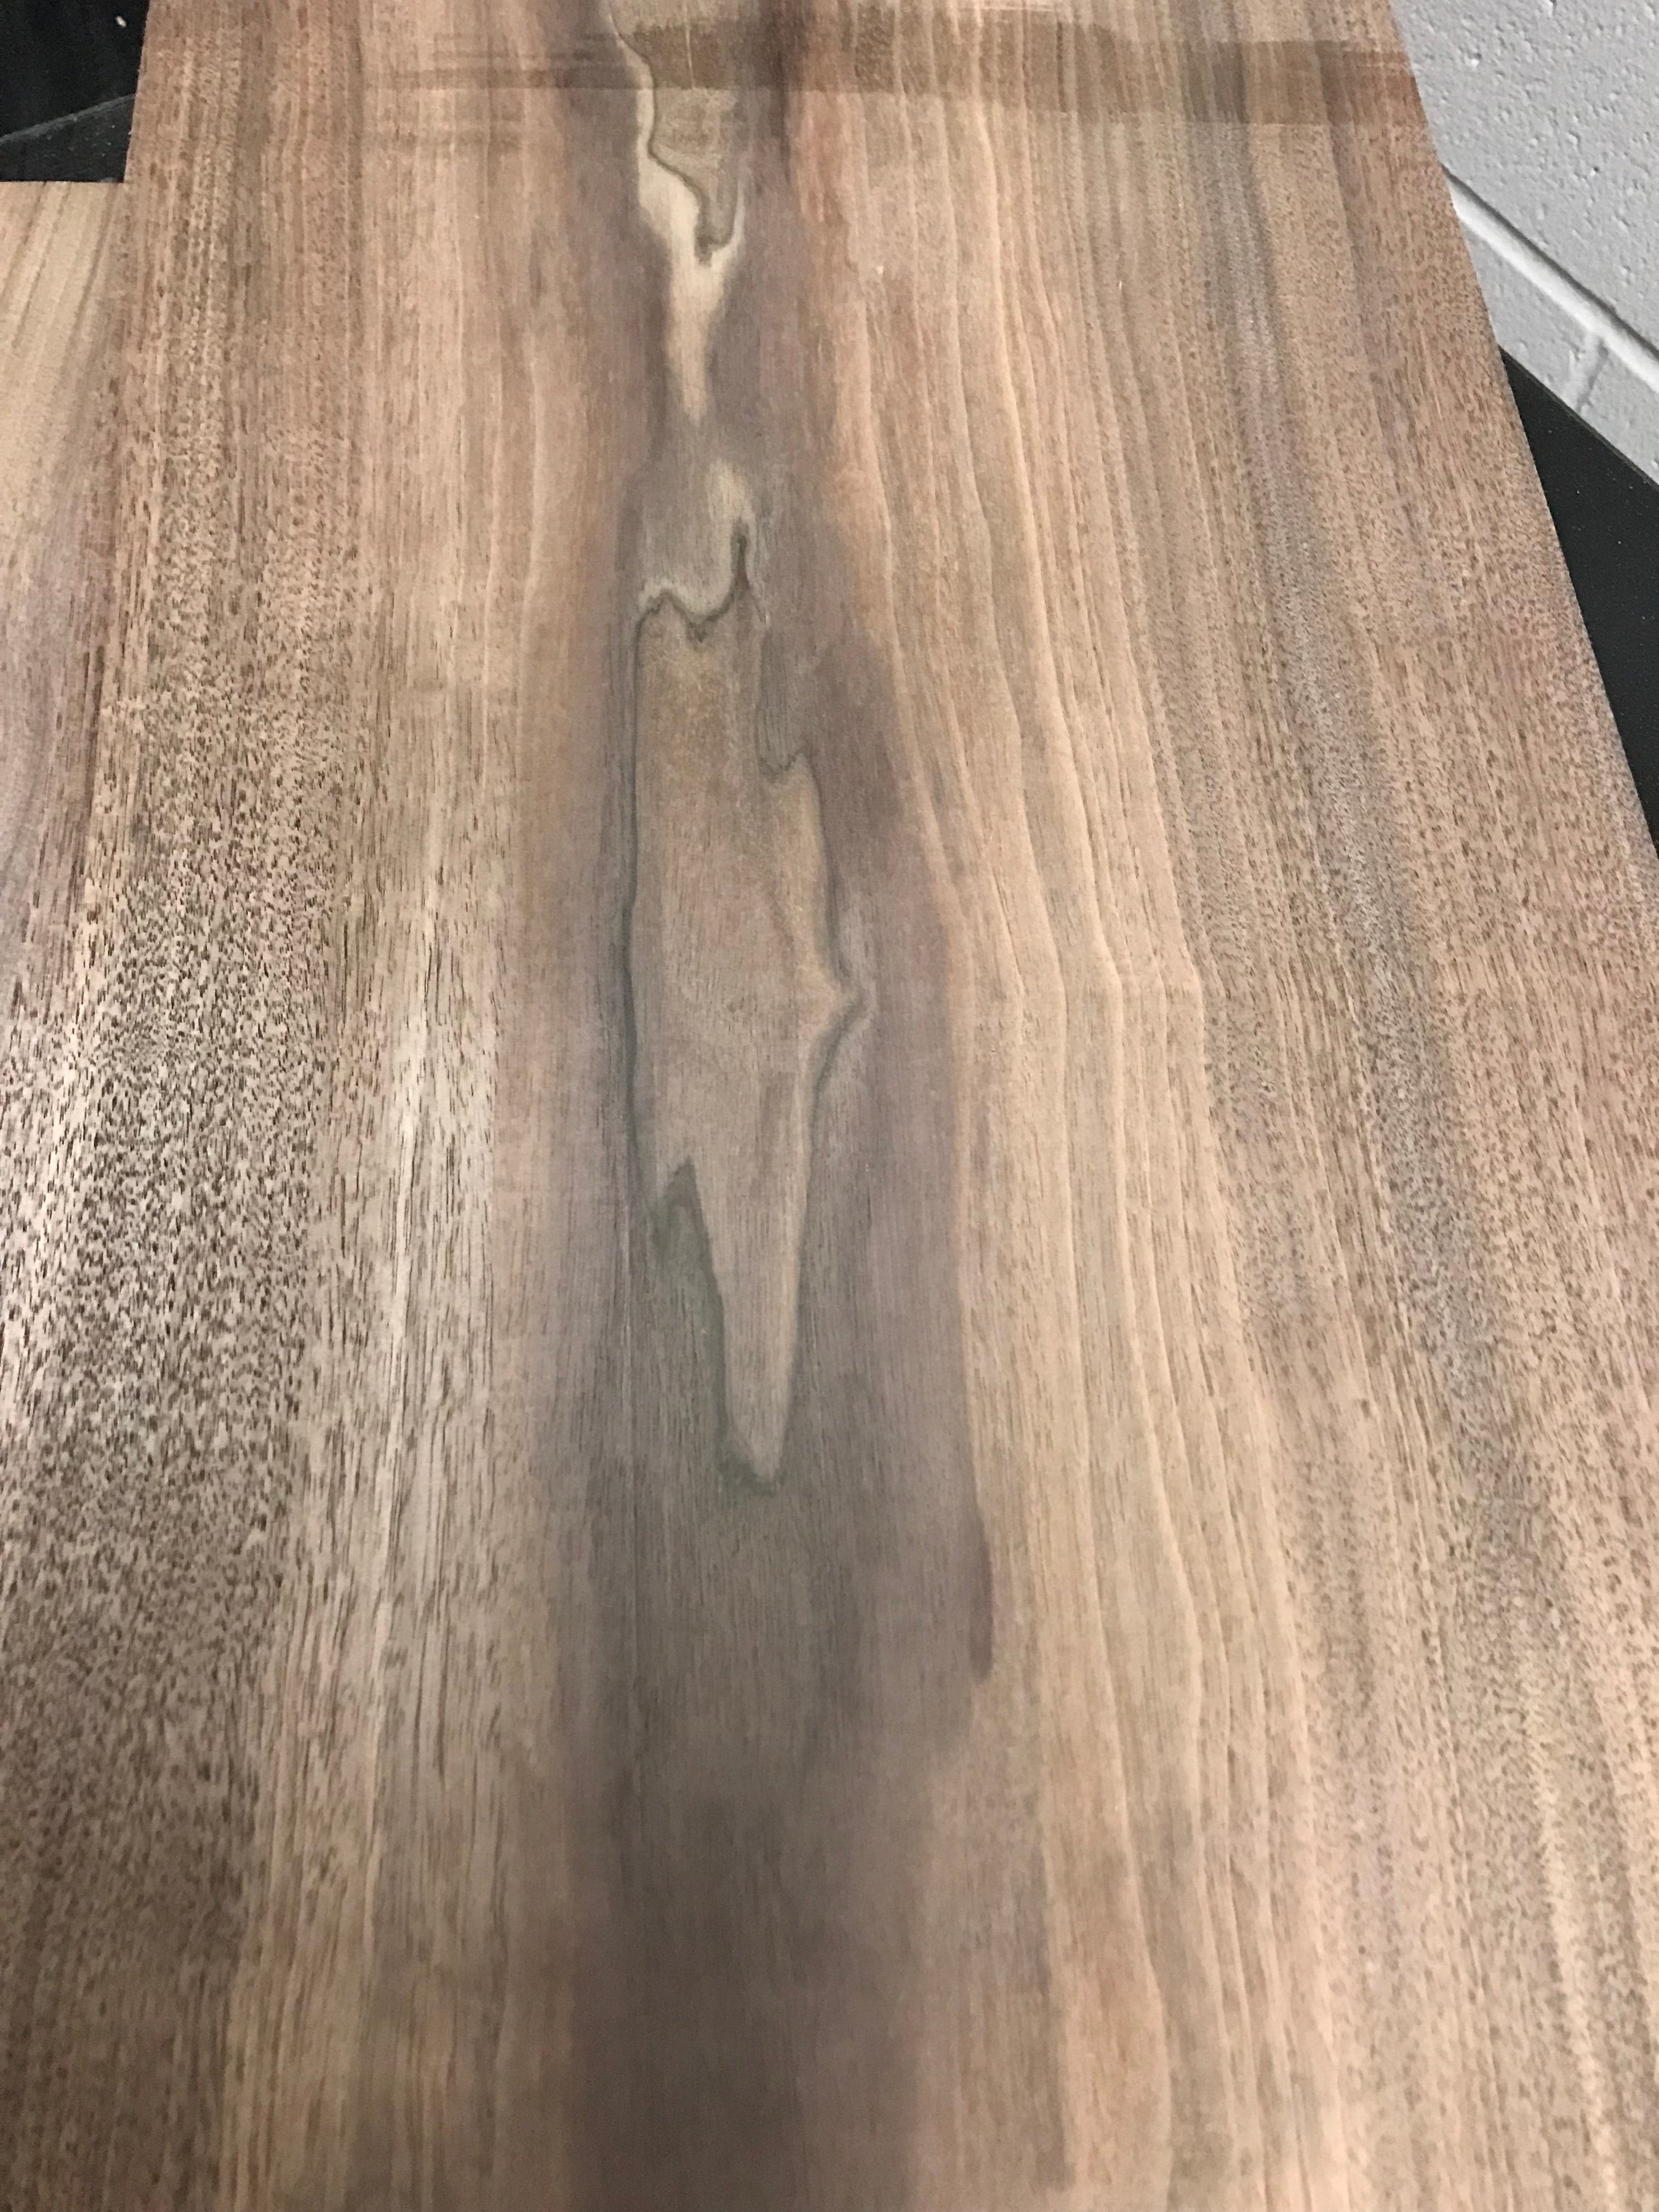 10 bd ft of KD 5/4 Black Walnut Select and Better Grade Dimensional S3S